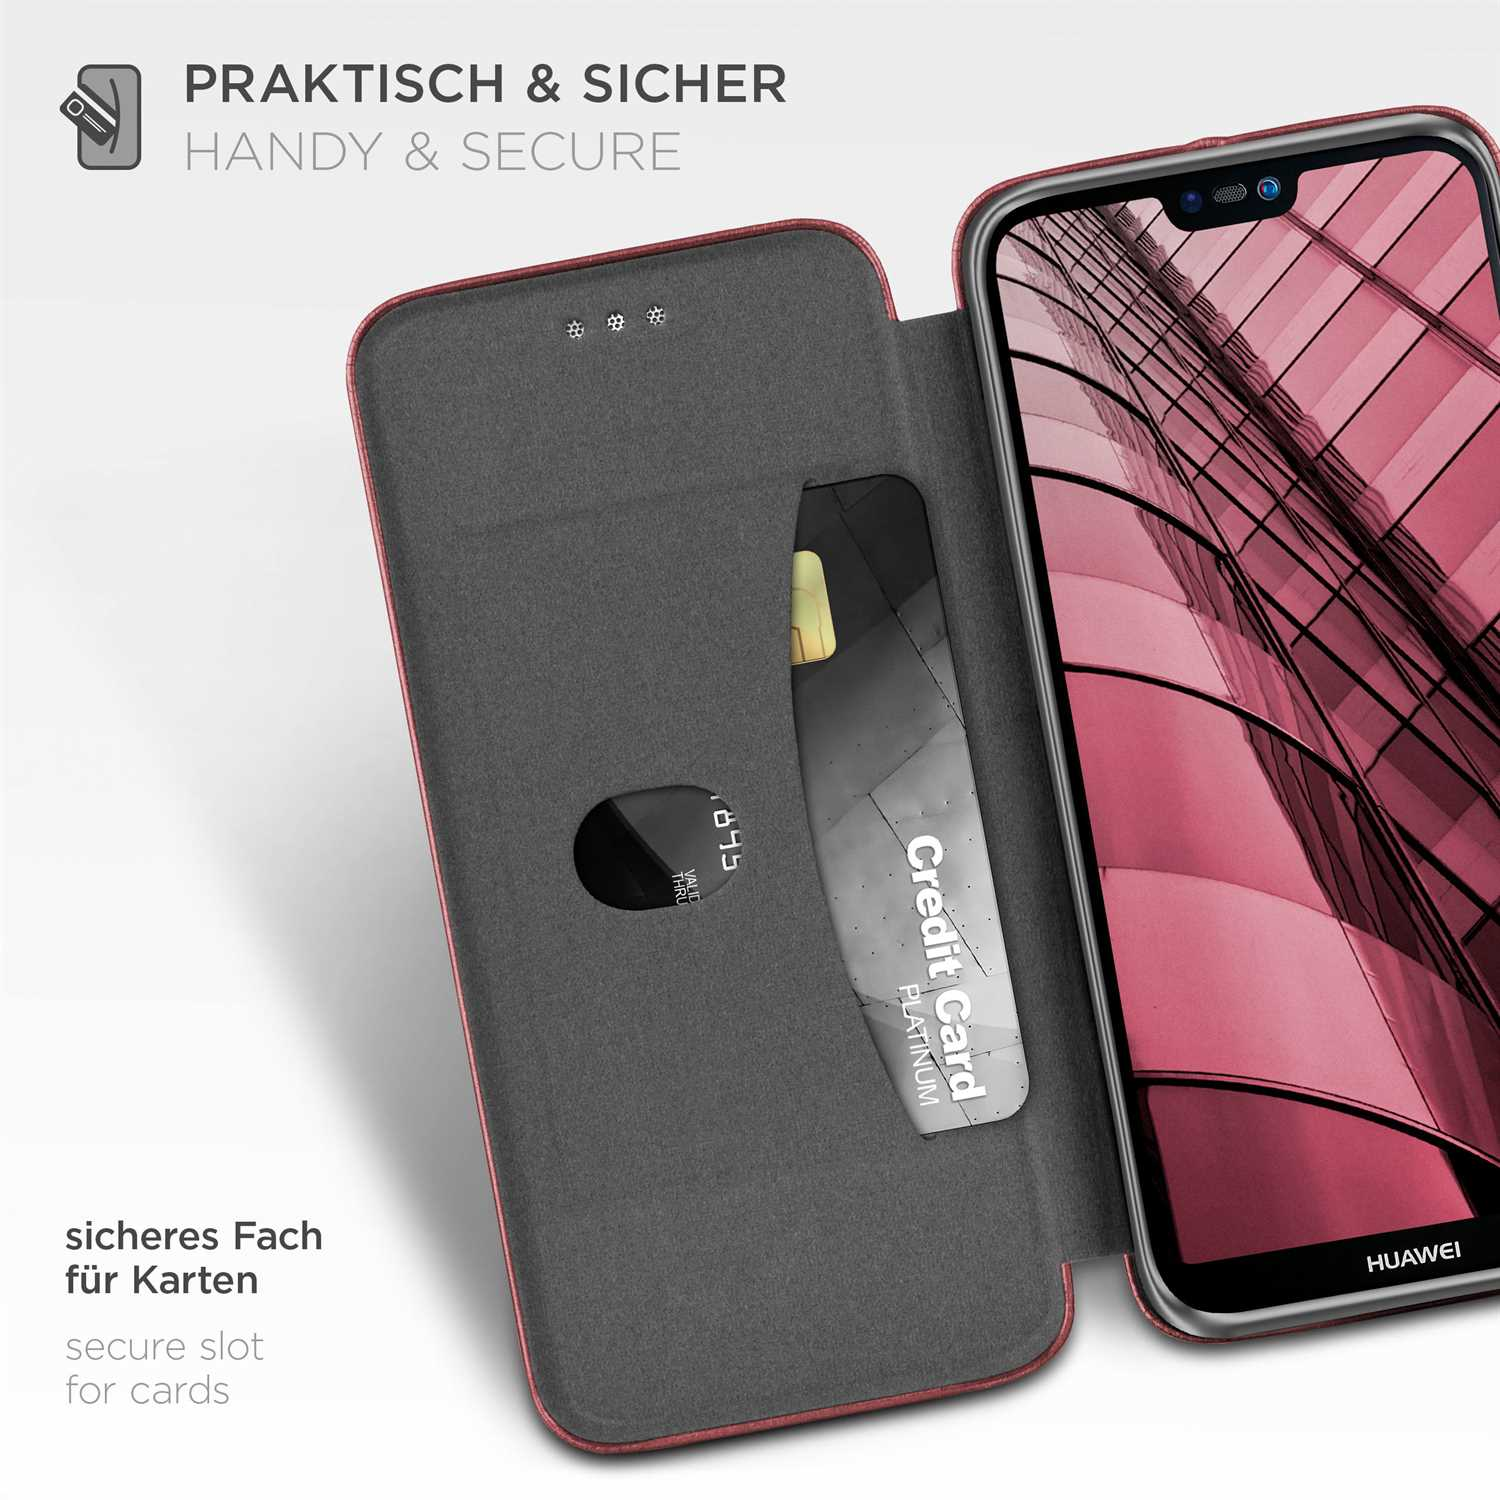 ONEFLOW Business Red Lite, Cover, Huawei, Flip Case, - P20 Burgund